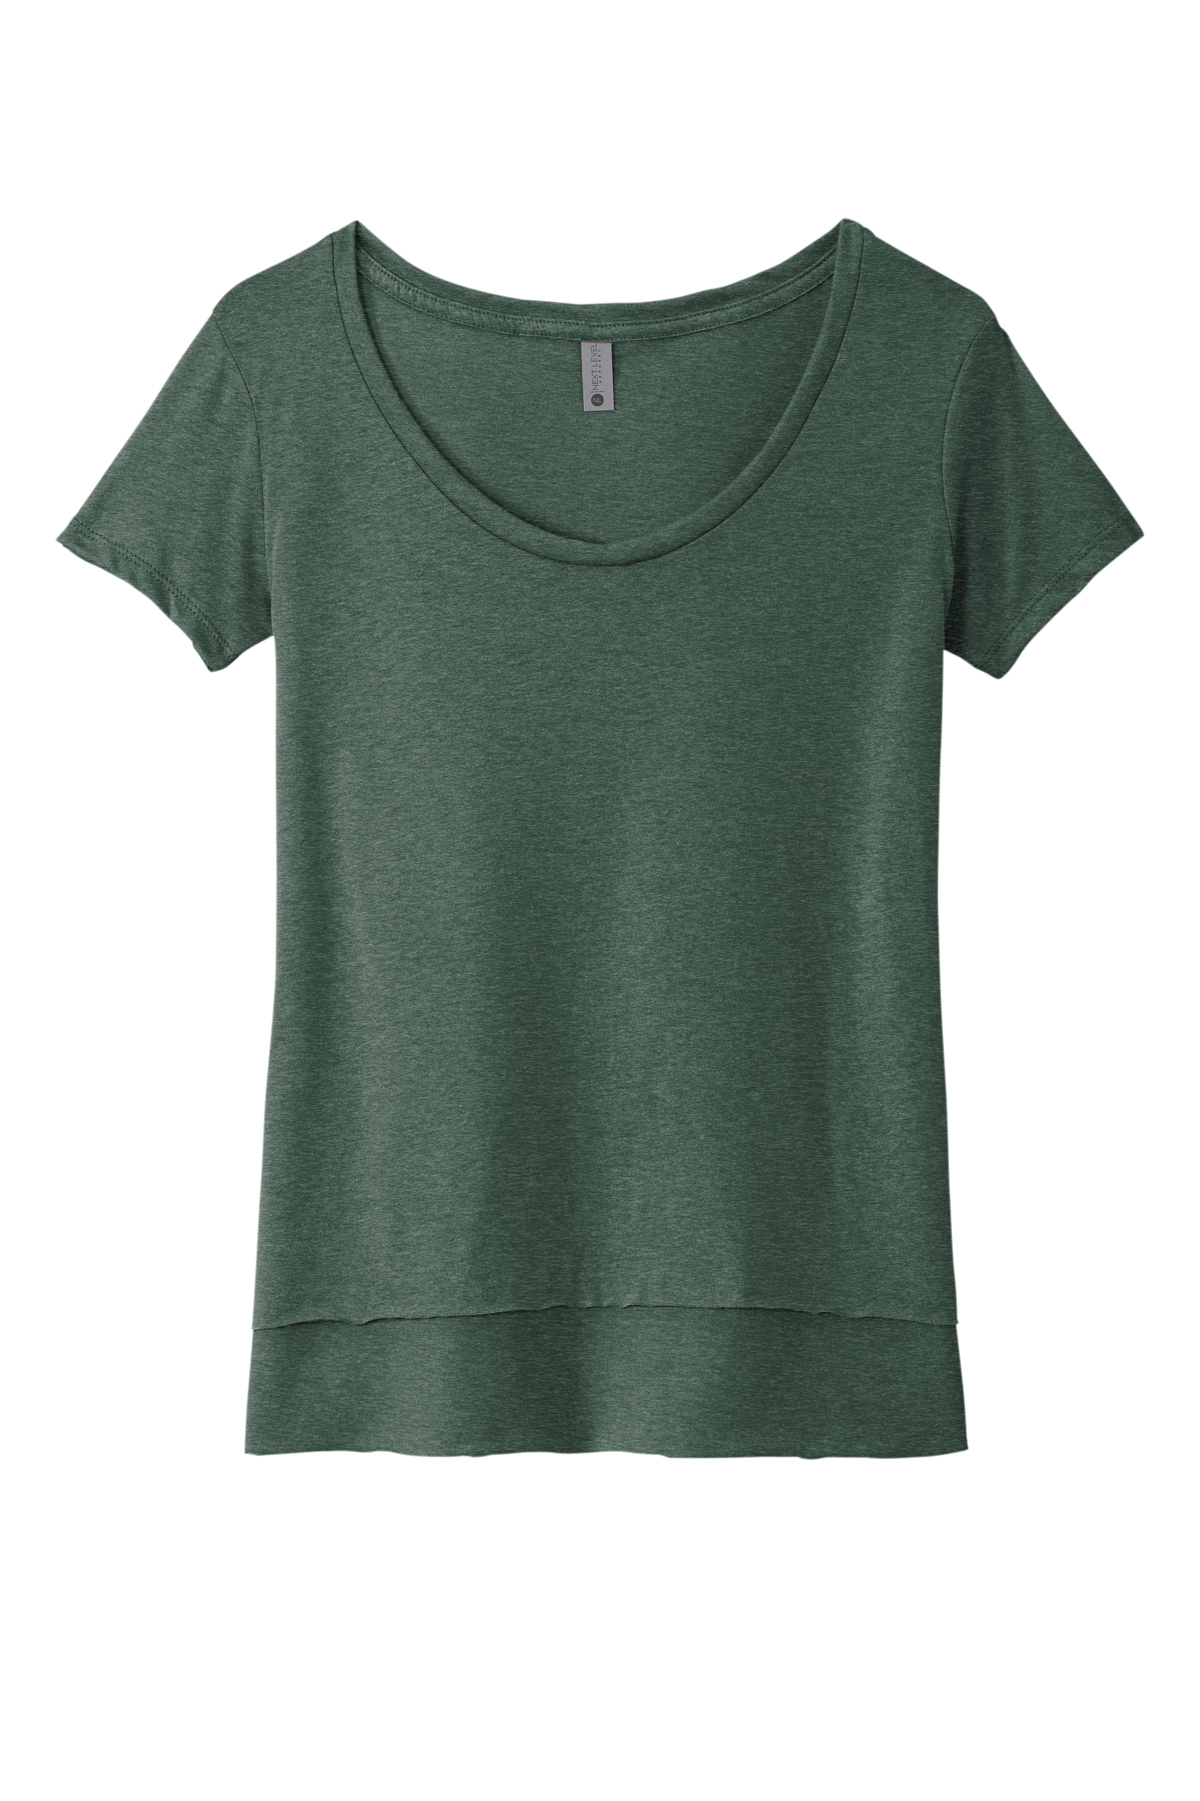 Next Level Apparel Women’s Festival Scoop Neck Tee | Product | Company ...